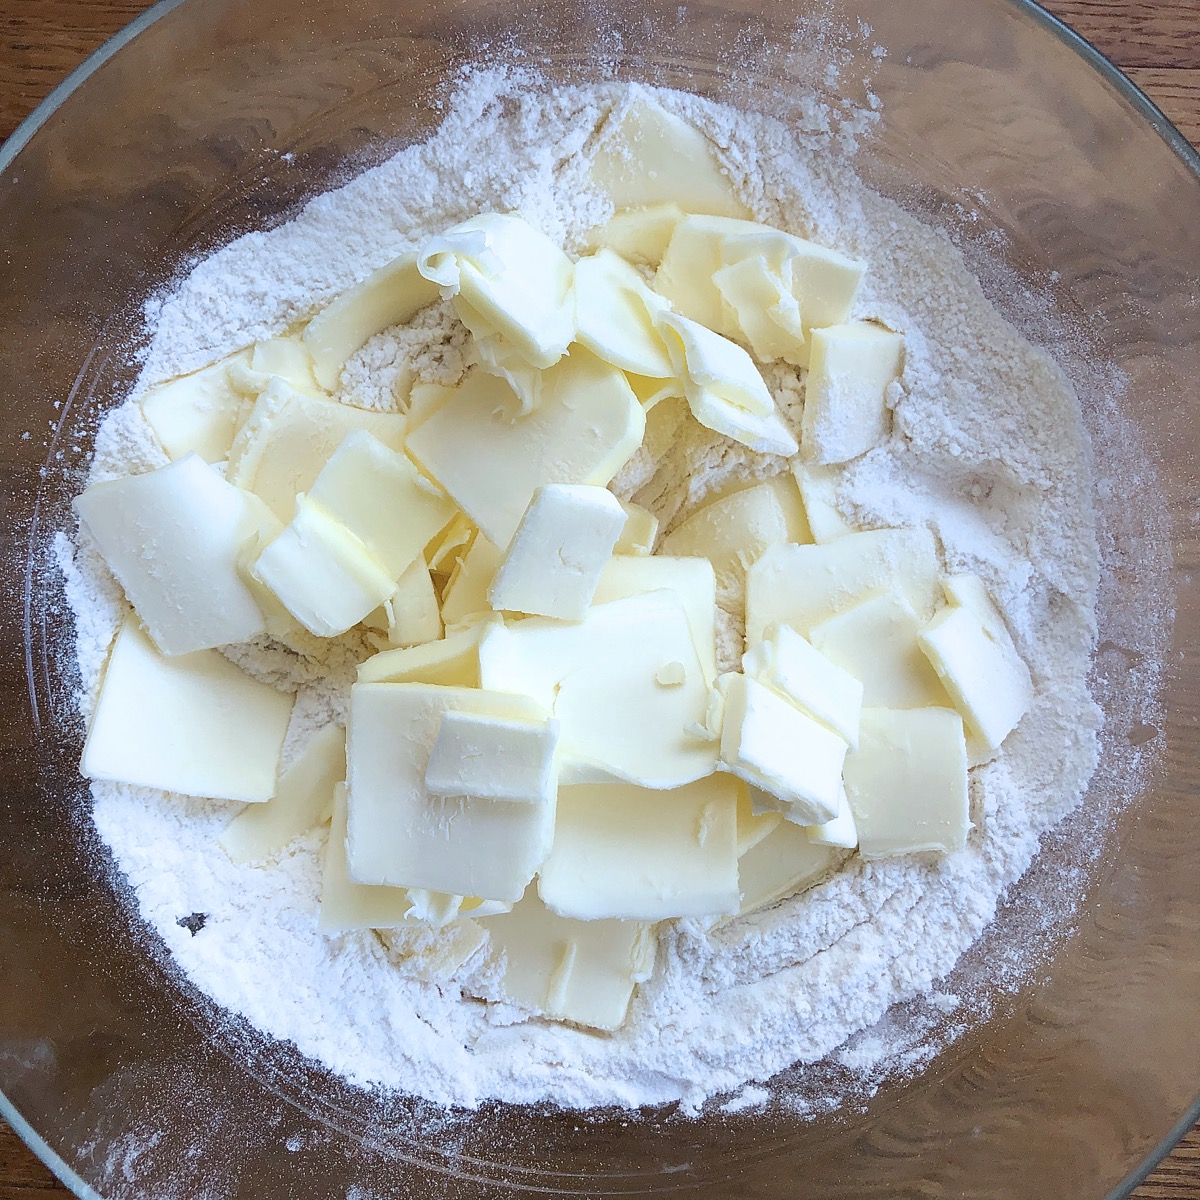 Sliced butter and dry ingredients in a bowl, ready to be combined.